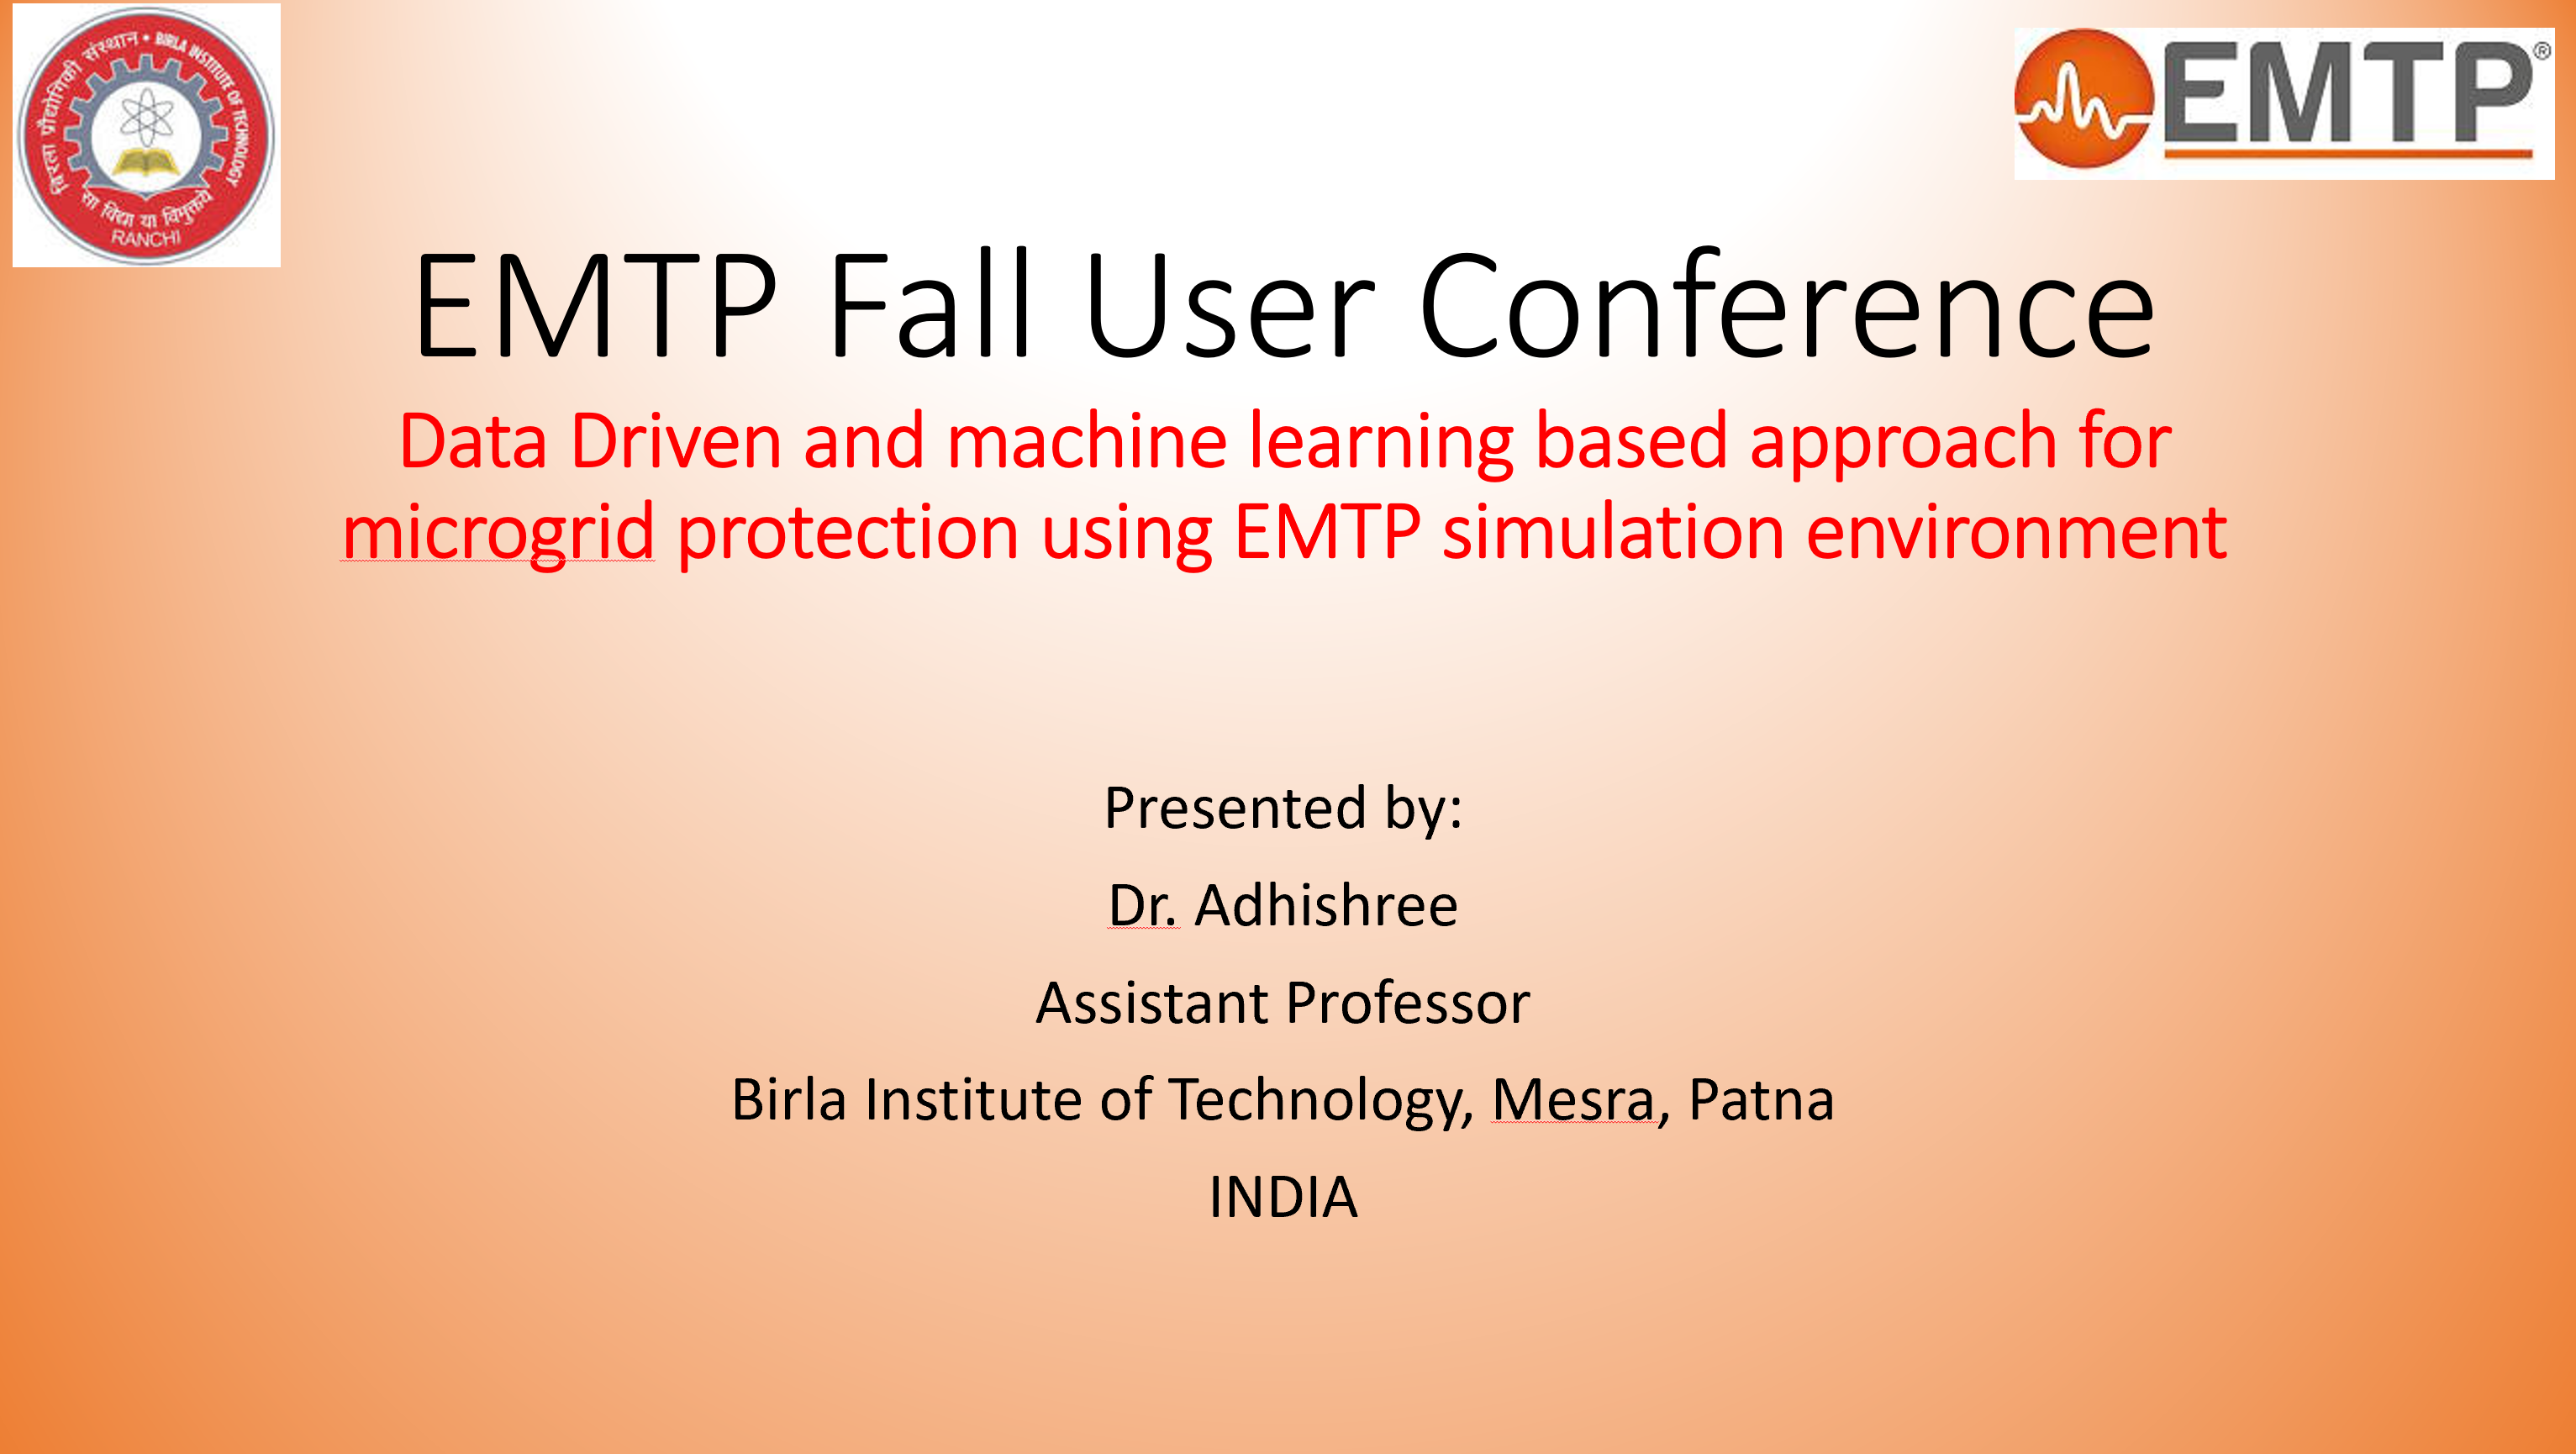 Data driven and machine learning based approach for microgrid protection using EMTP